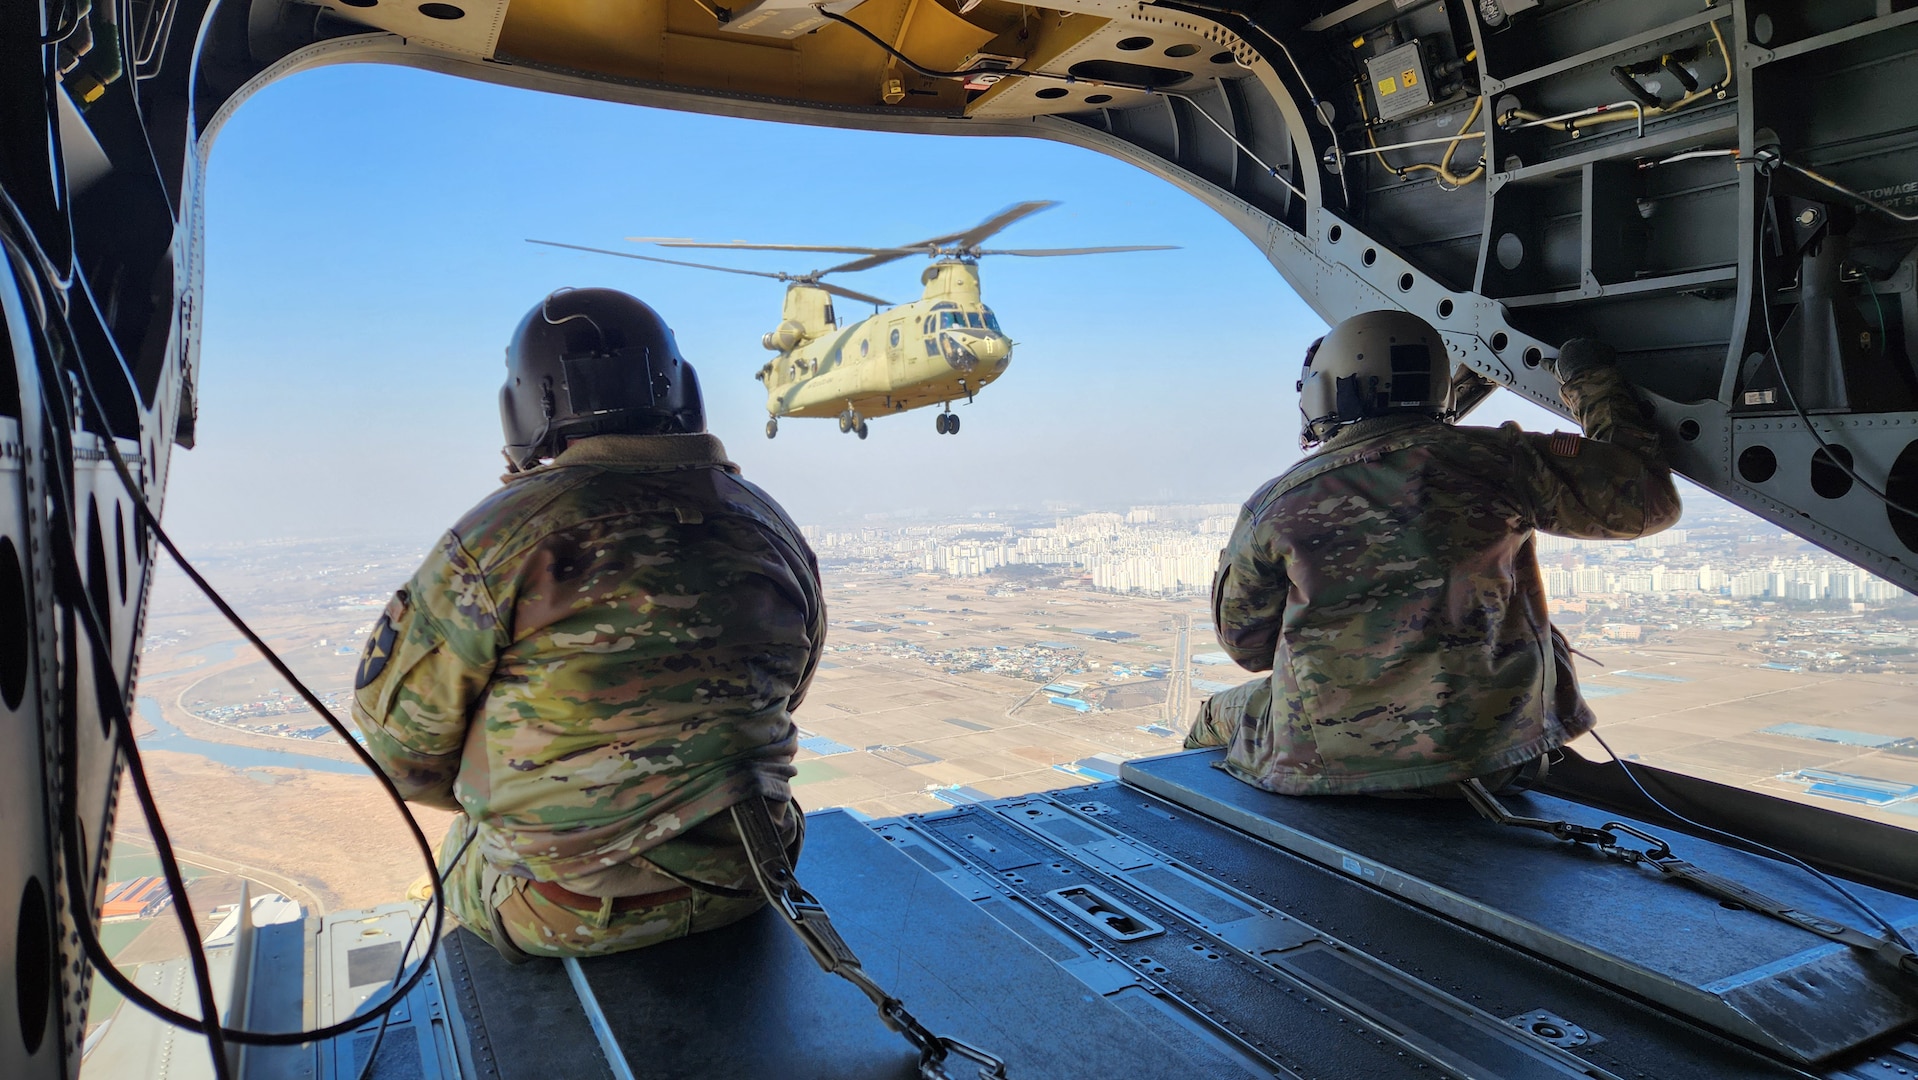 U.S. Army Sergeants Qadiyr Ajala and Dustin Spivey assigned to Bravo Company, 3rd General Support Aviation, 2nd Combat Aviation Battalion, 2nd Infantry Division, ROK-US Combined Division operate as crew chiefs for a U.S. Army CH-47 Chinook during an air assault training event as part of exercise Freedom Shield 24, in South Korea, March 13, 2024. In support of the Armistice Agreement, FS24 underscores the enduring military partnership between the ROK and the U.S. It reinforces the role of the alliance as the linchpin for regional peace and security, reaffirming the unwavering commitment of the U.S. to help defend the Republic of Korea. (Texas Army National Guard photo by Sgt. 1st Class Bethany Anderson 100th Mobile Public Affairs Detachment)